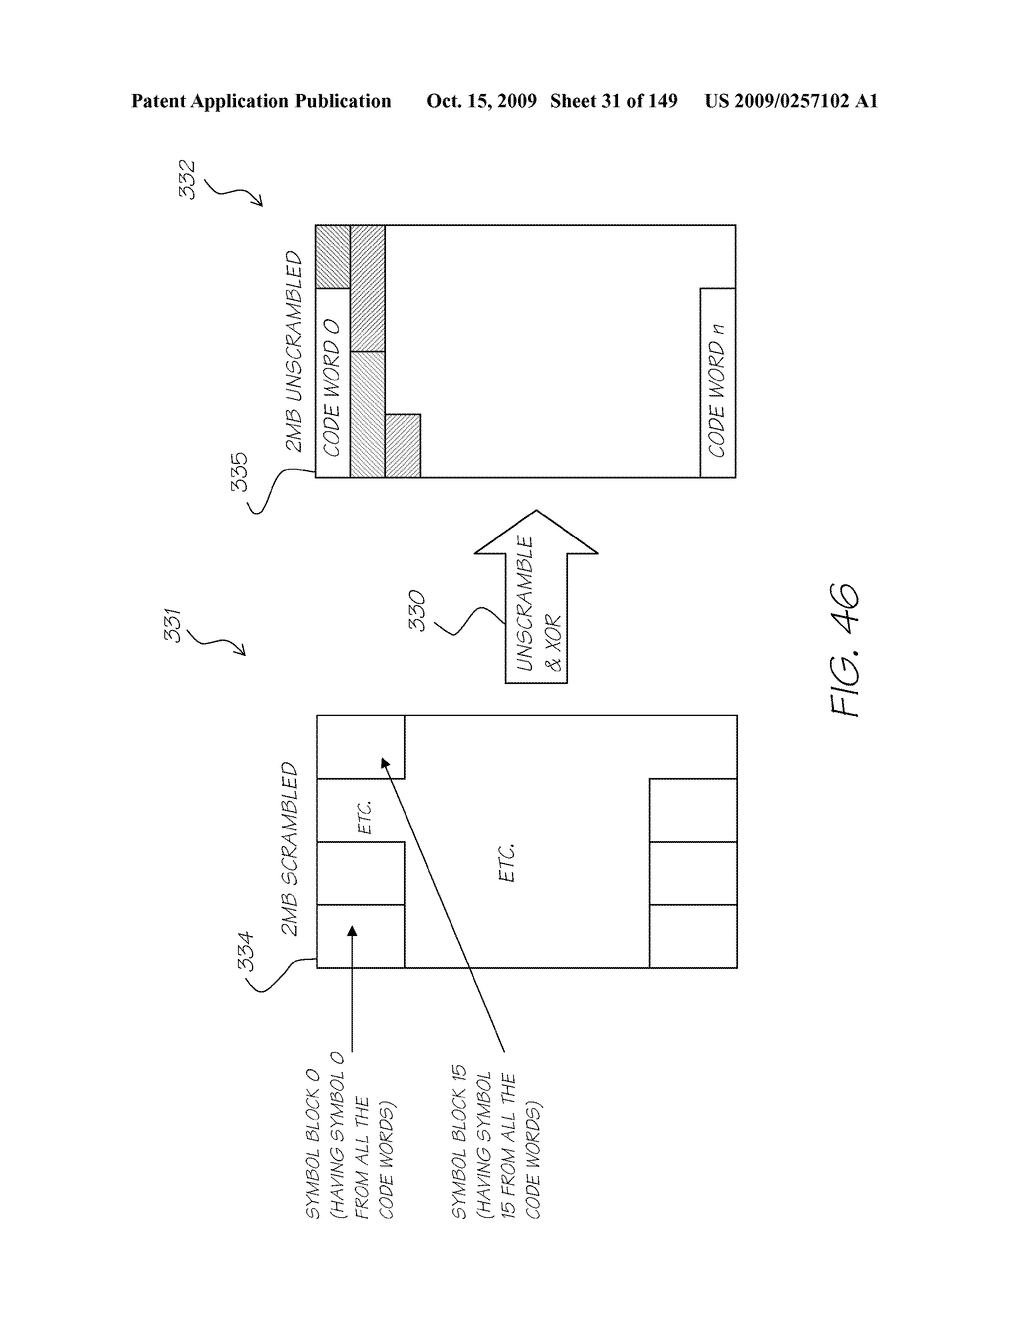 IMAGE PROCESSING APPARATUS HAVING CARD READER FOR APPLYING EFFECTS STORED ON A CARD TO A STORED IMAGE - diagram, schematic, and image 32